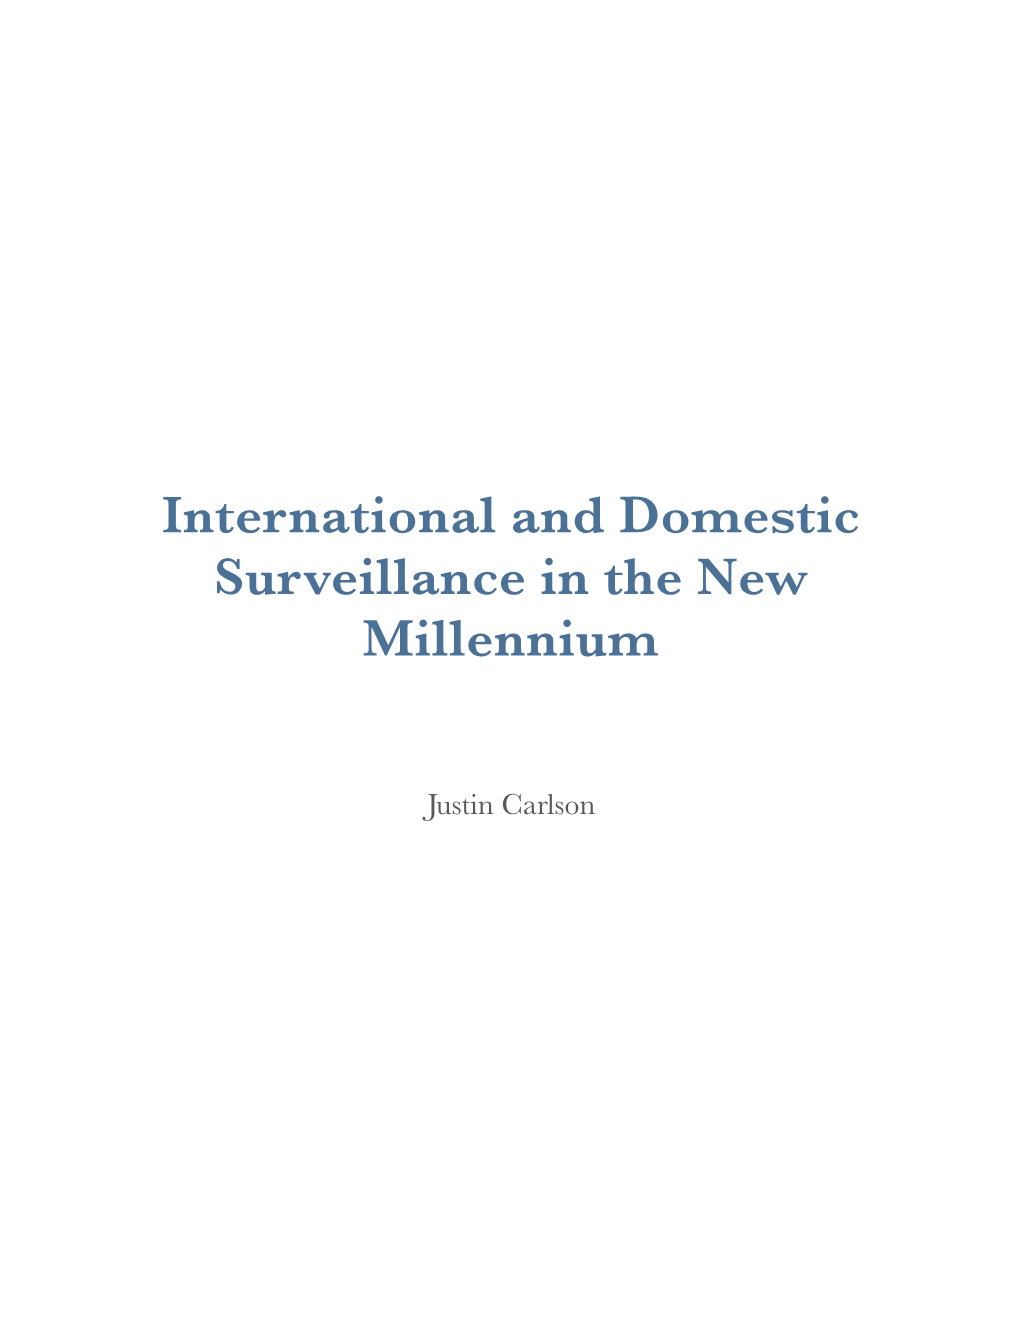 International and Domestic Surveillance in the New Millennium